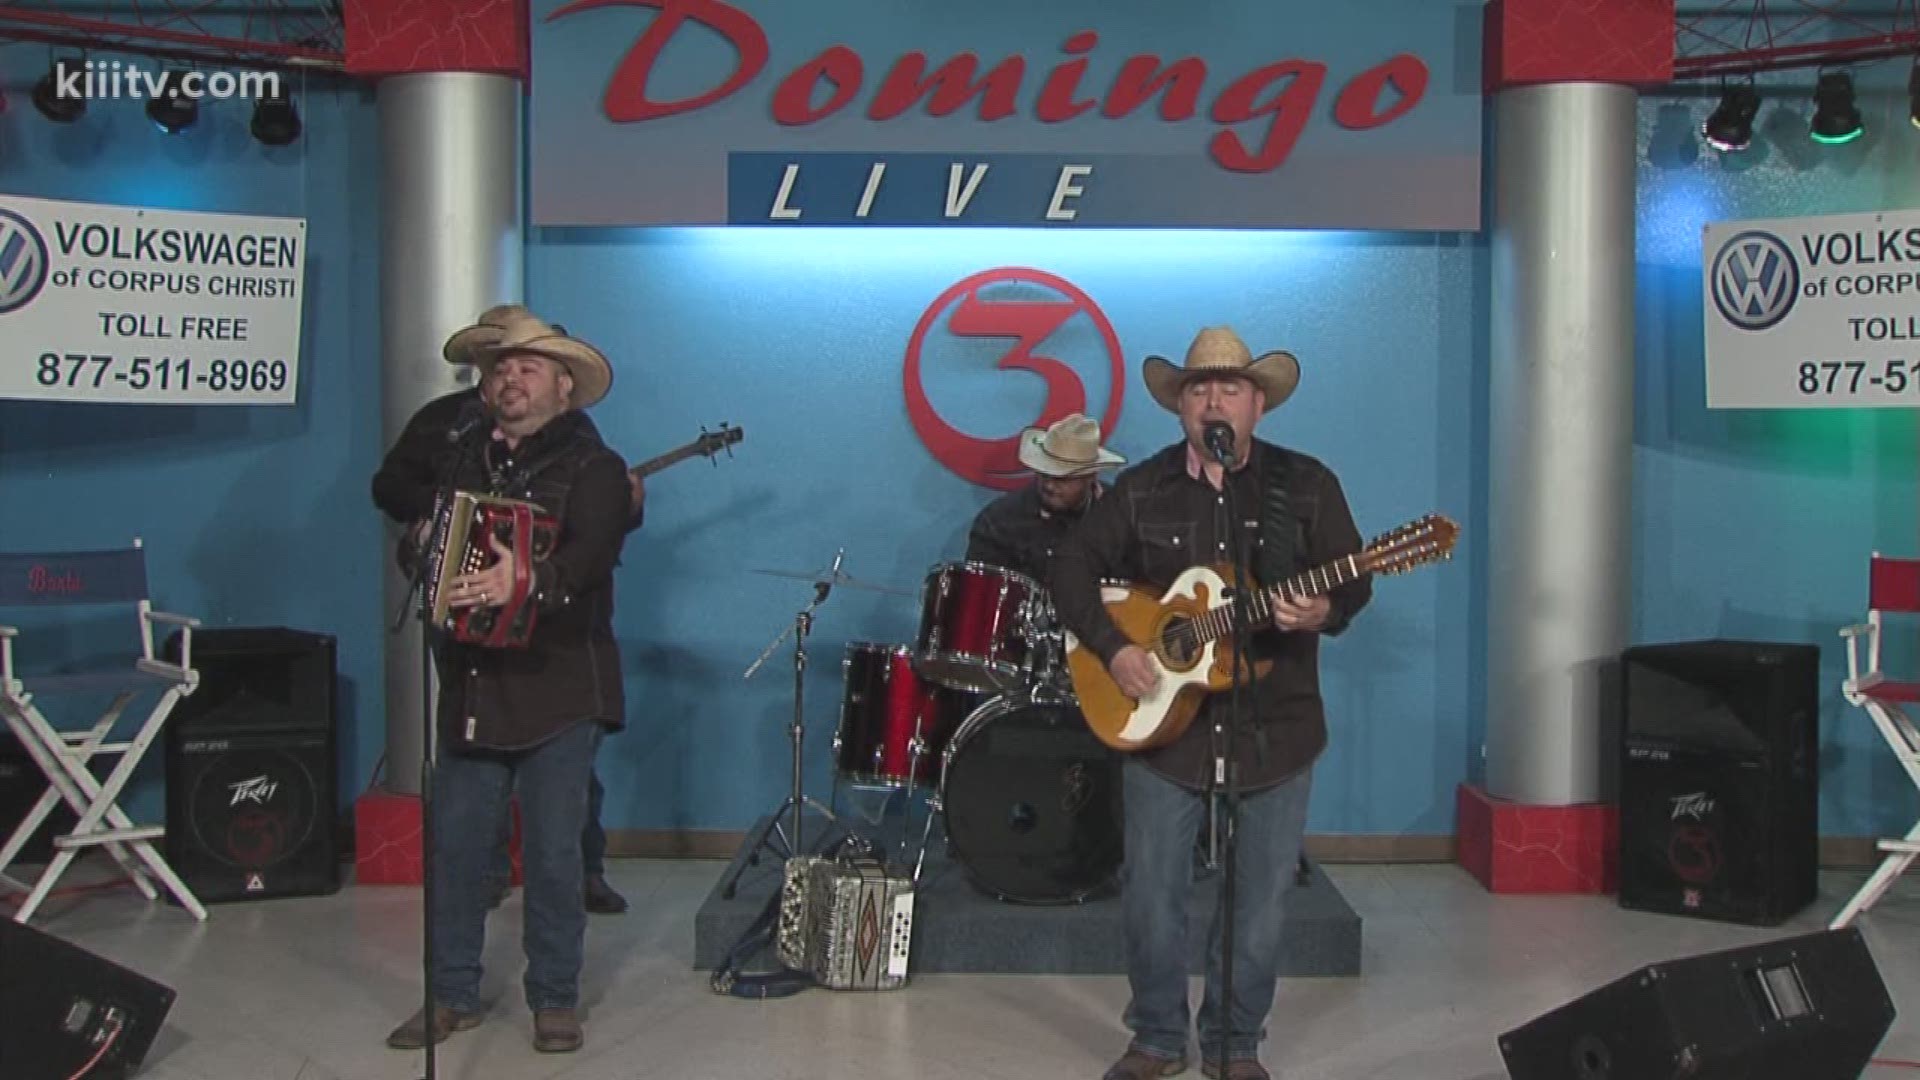 Tejano Boys from Brownsville, Texas, perform one of their latest singles "Presiento Que Voy A Llorar" on Domingo Live.